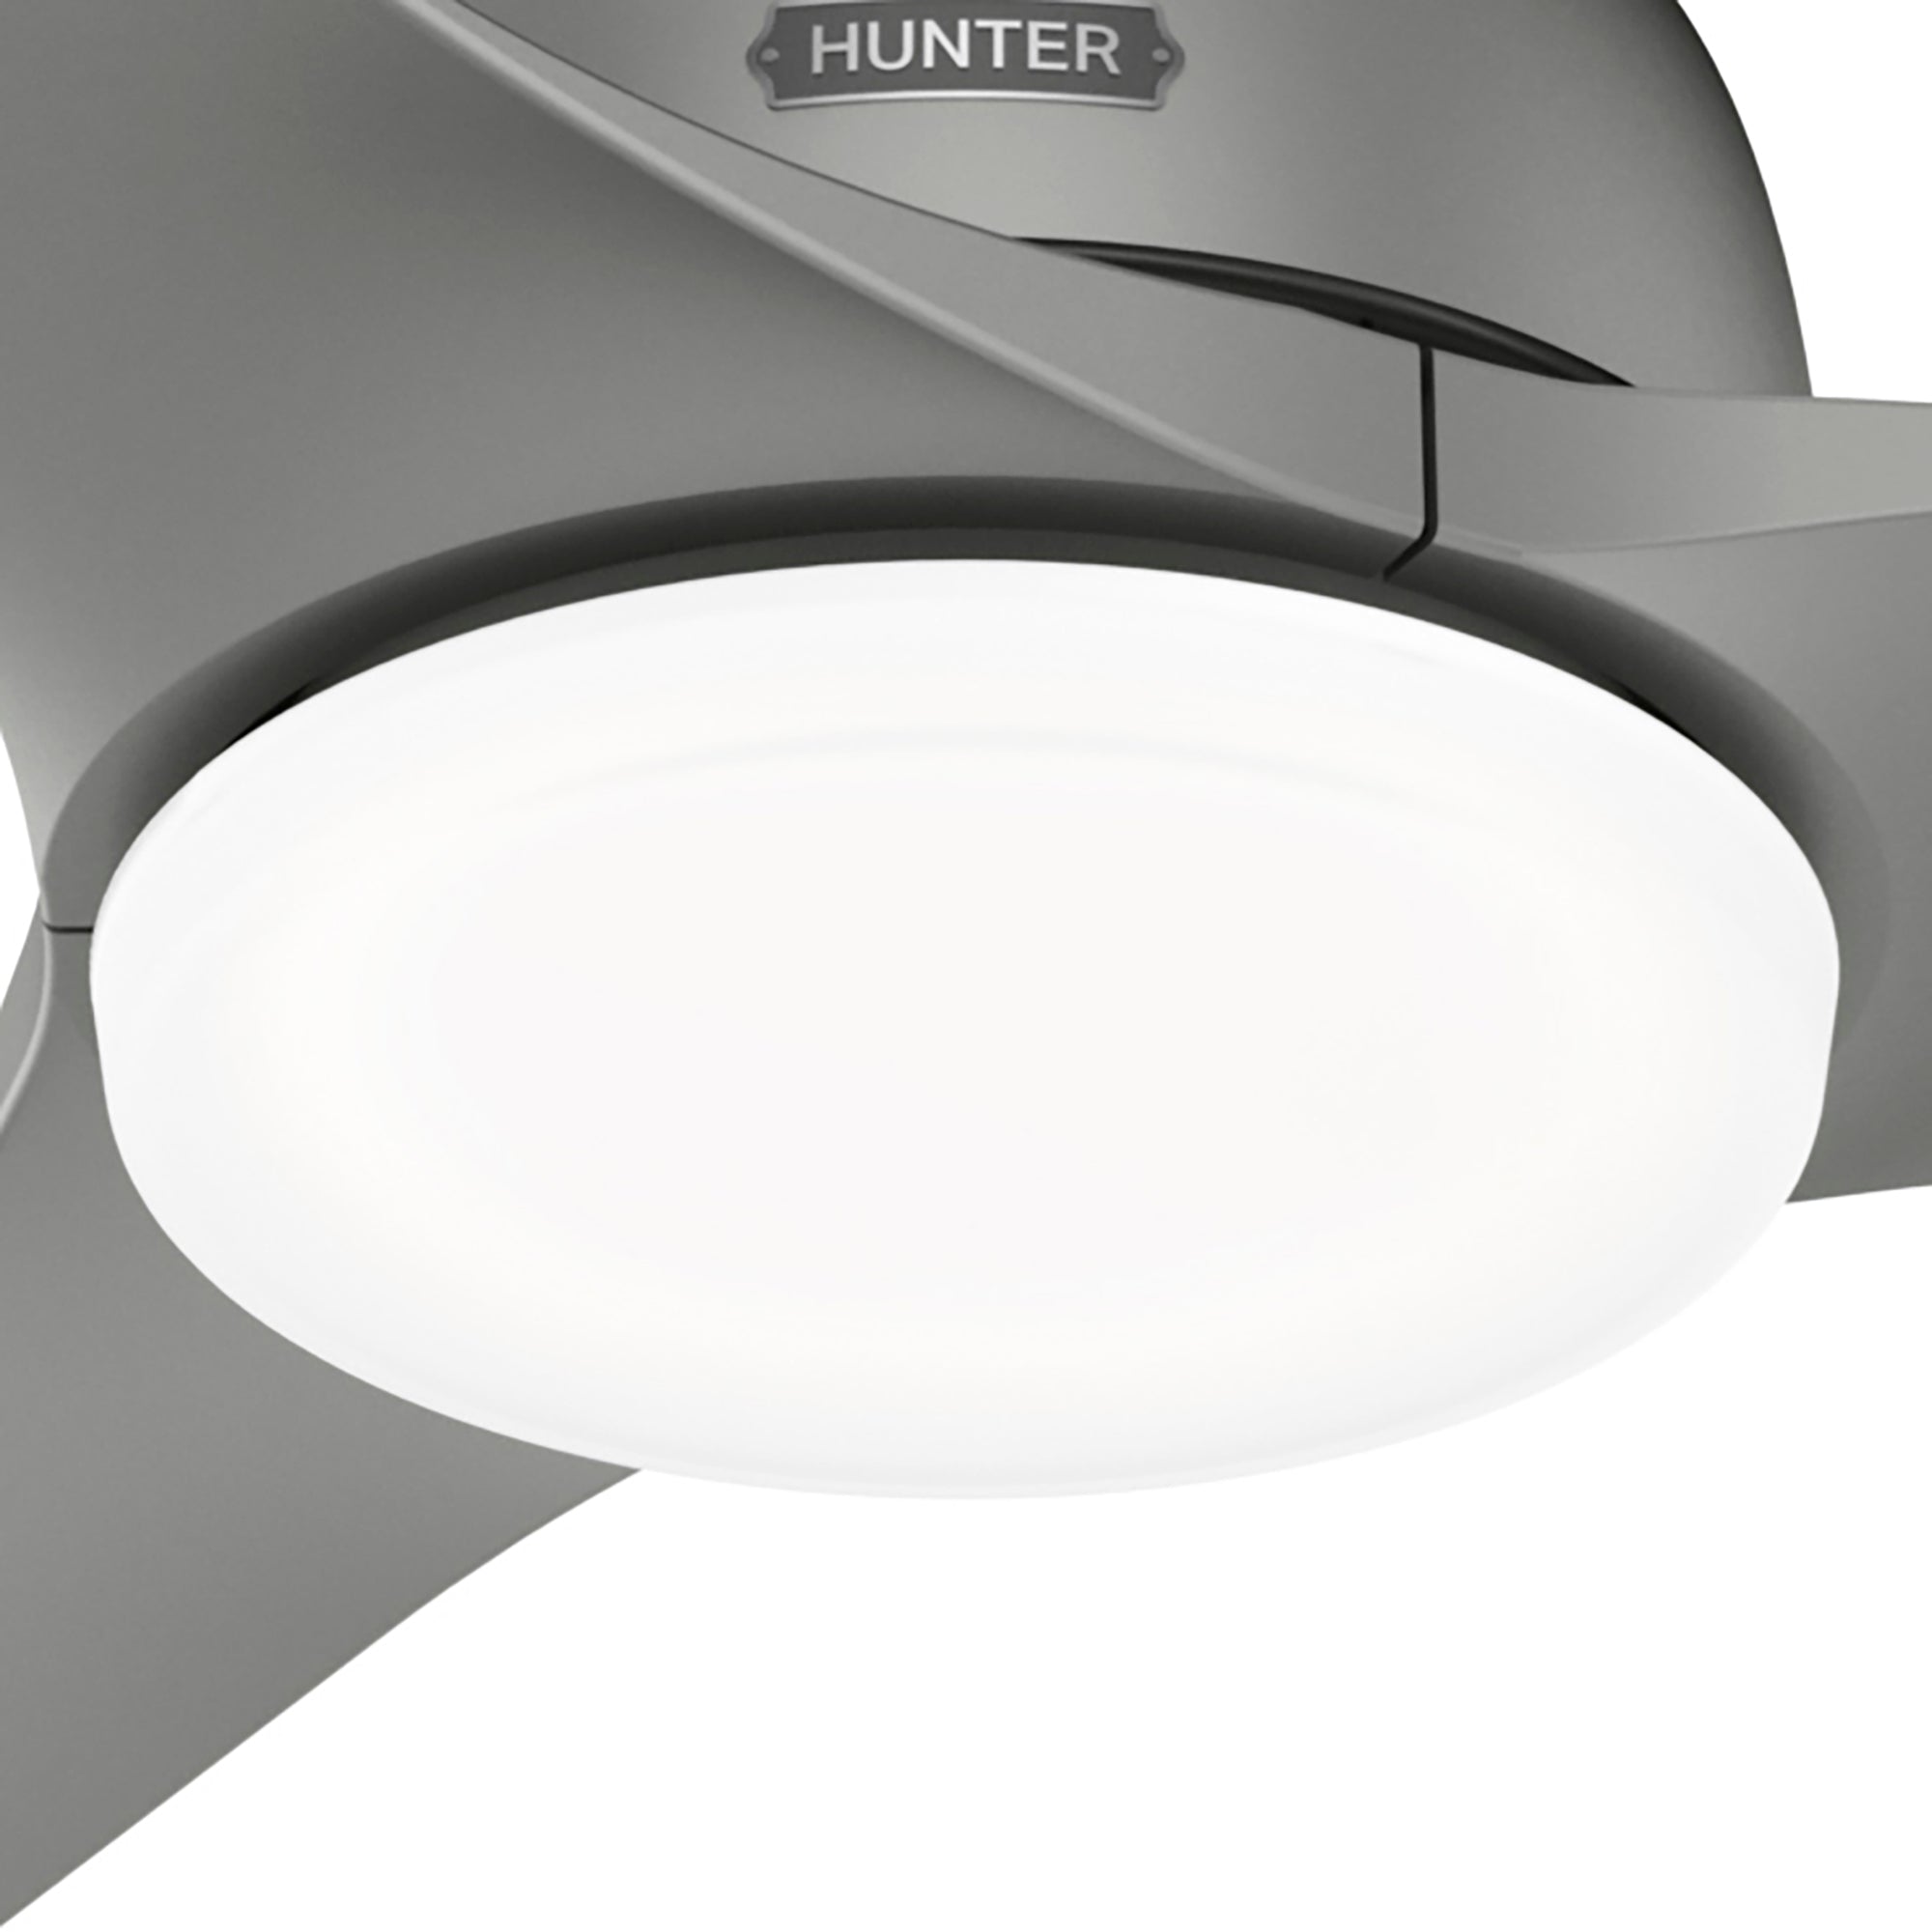 Hunter 52 inch Gallegos Damp Rated Ceiling Fan and Wall Control